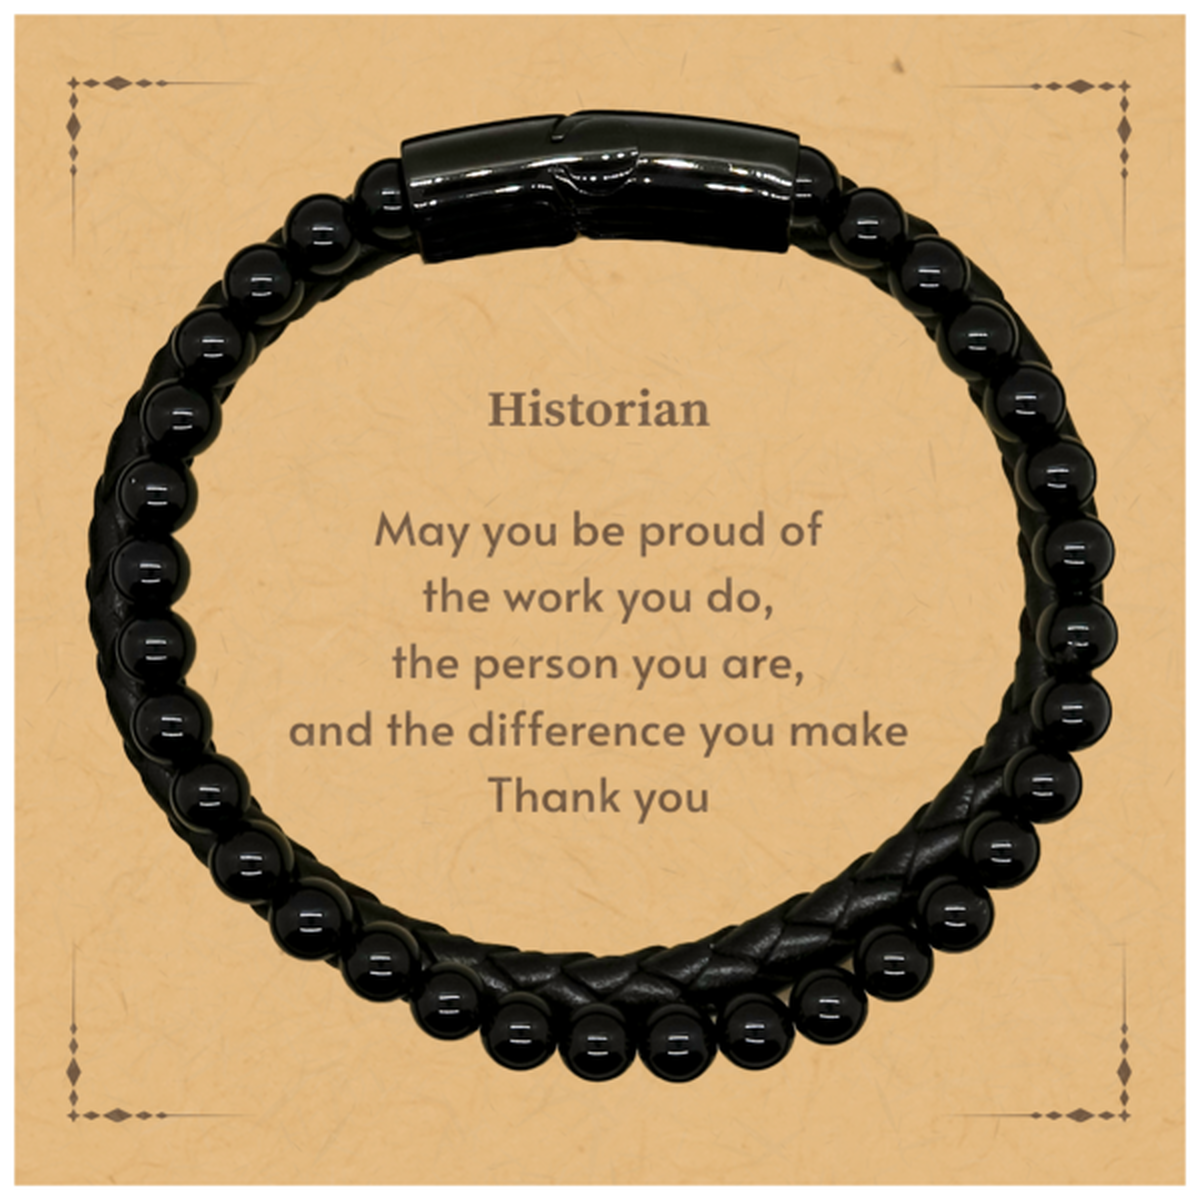 Heartwarming Stone Leather Bracelets Retirement Coworkers Gifts for Historian, Historian May You be proud of the work you do, the person you are Gifts for Boss Men Women Friends